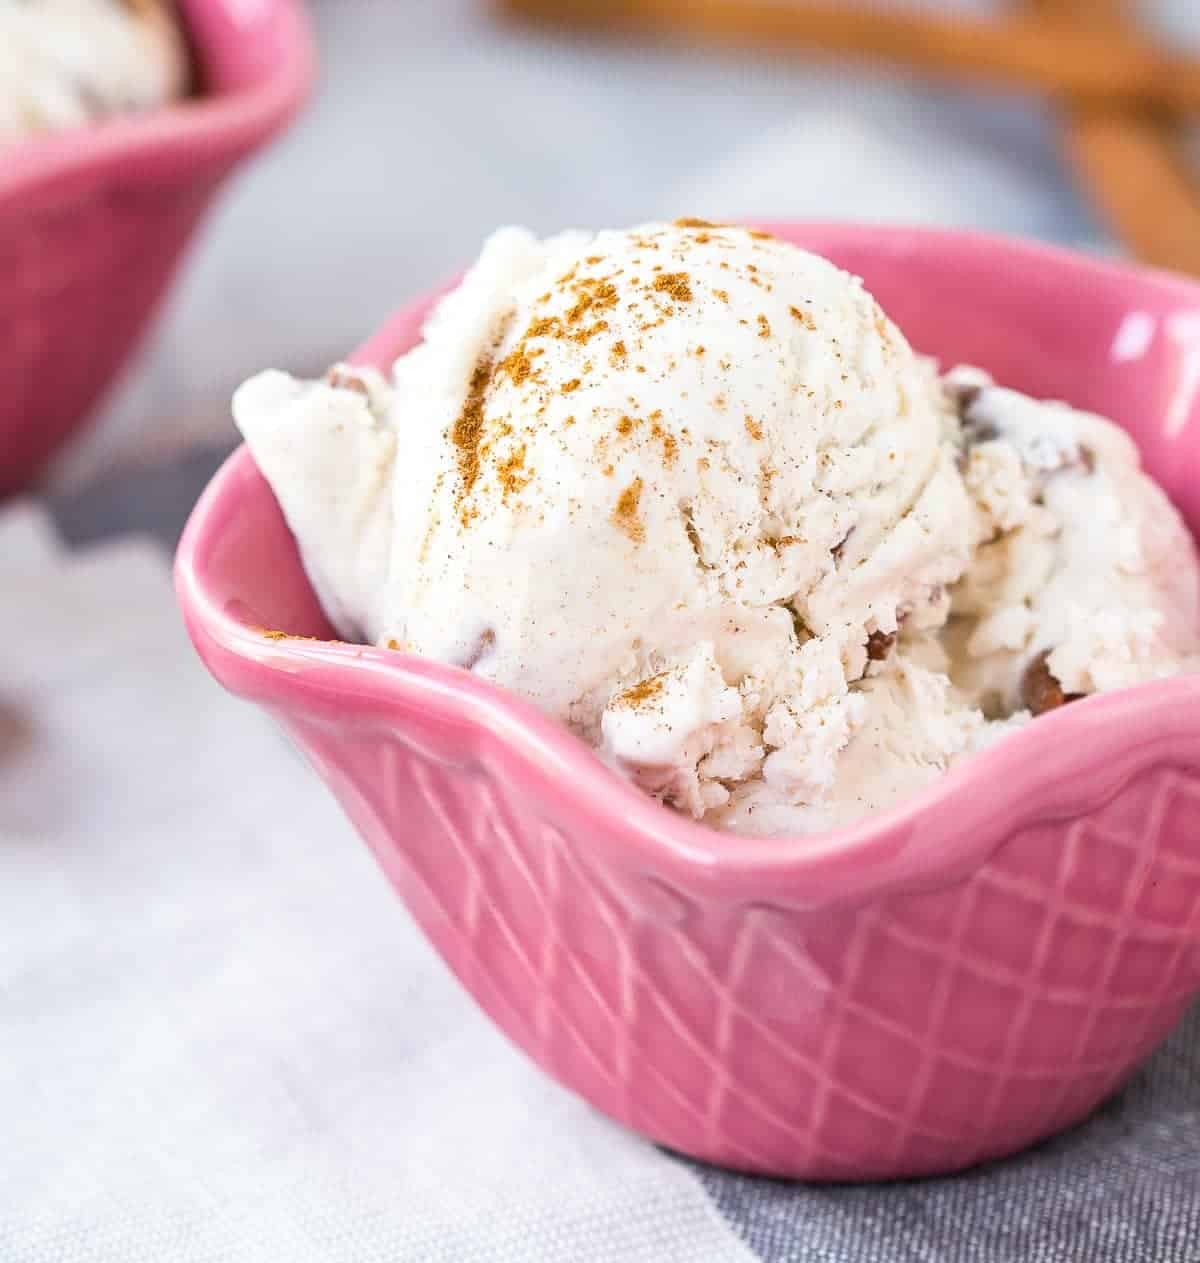 Closeup of ice cream in bowl, garnished with a sprinkle of cinnamon.